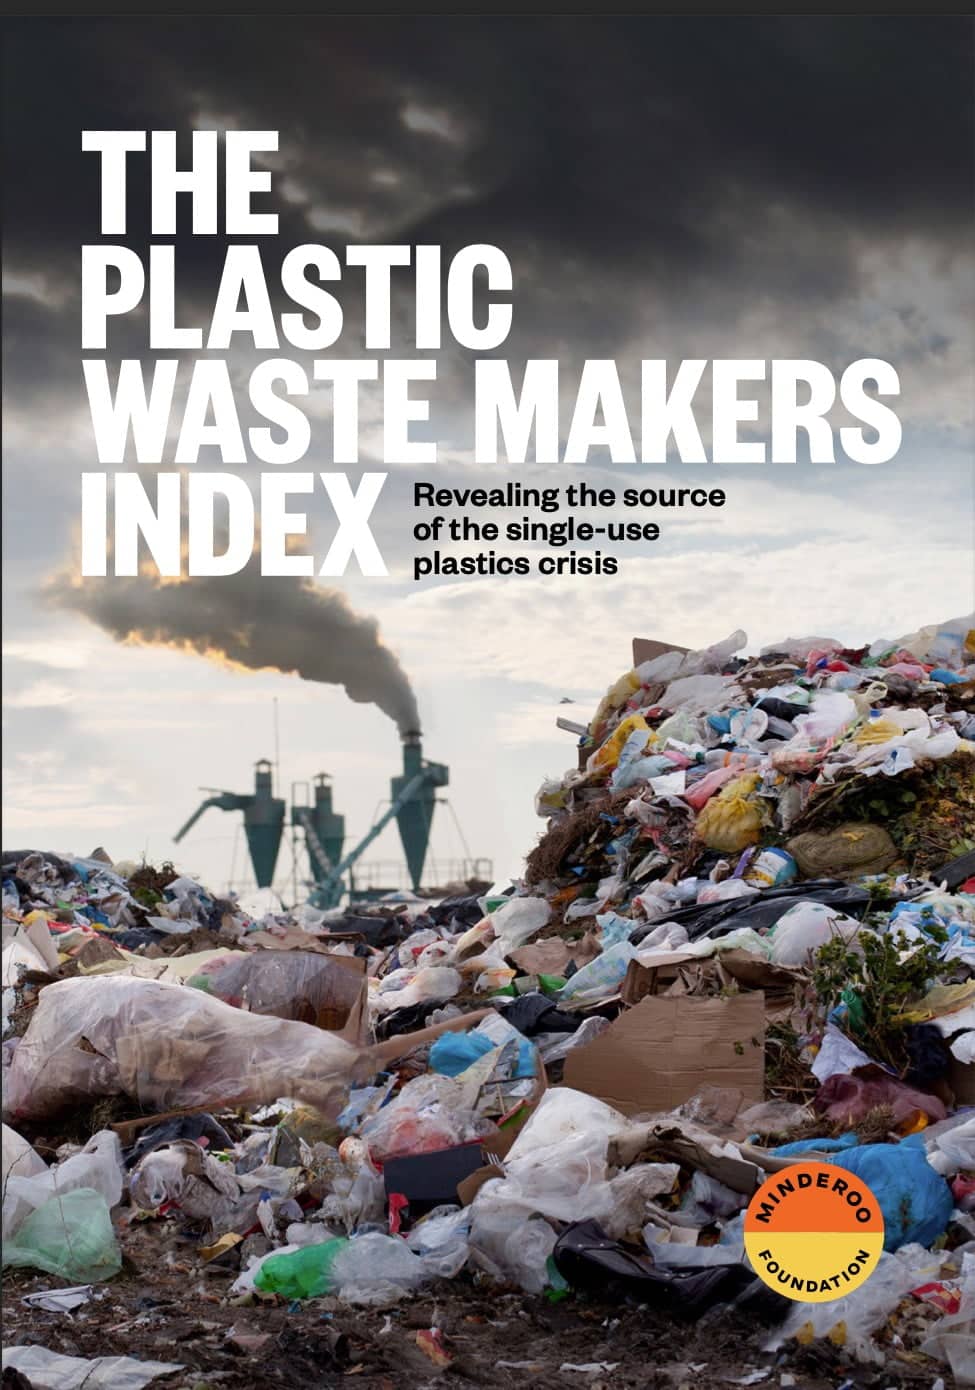 thefuture, Plastic Waste Makers Index